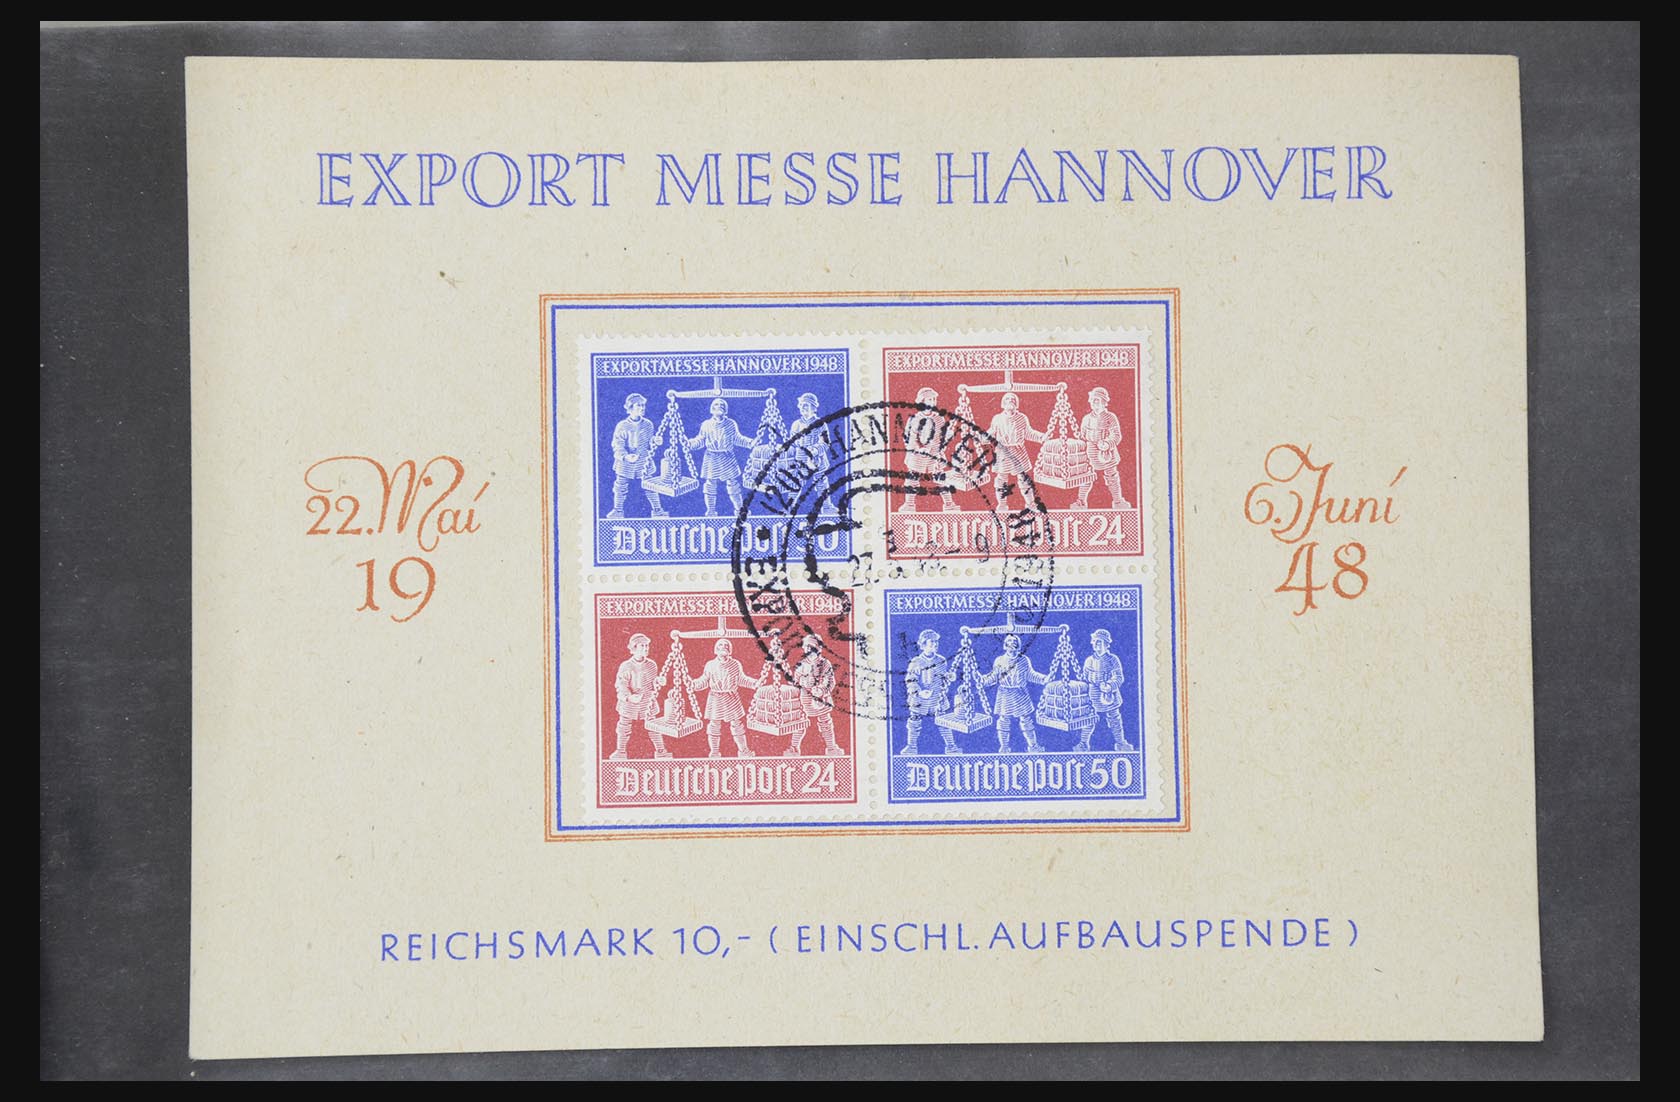 31581 004 - 31581 Germany covers and FDC's 1945-1981.